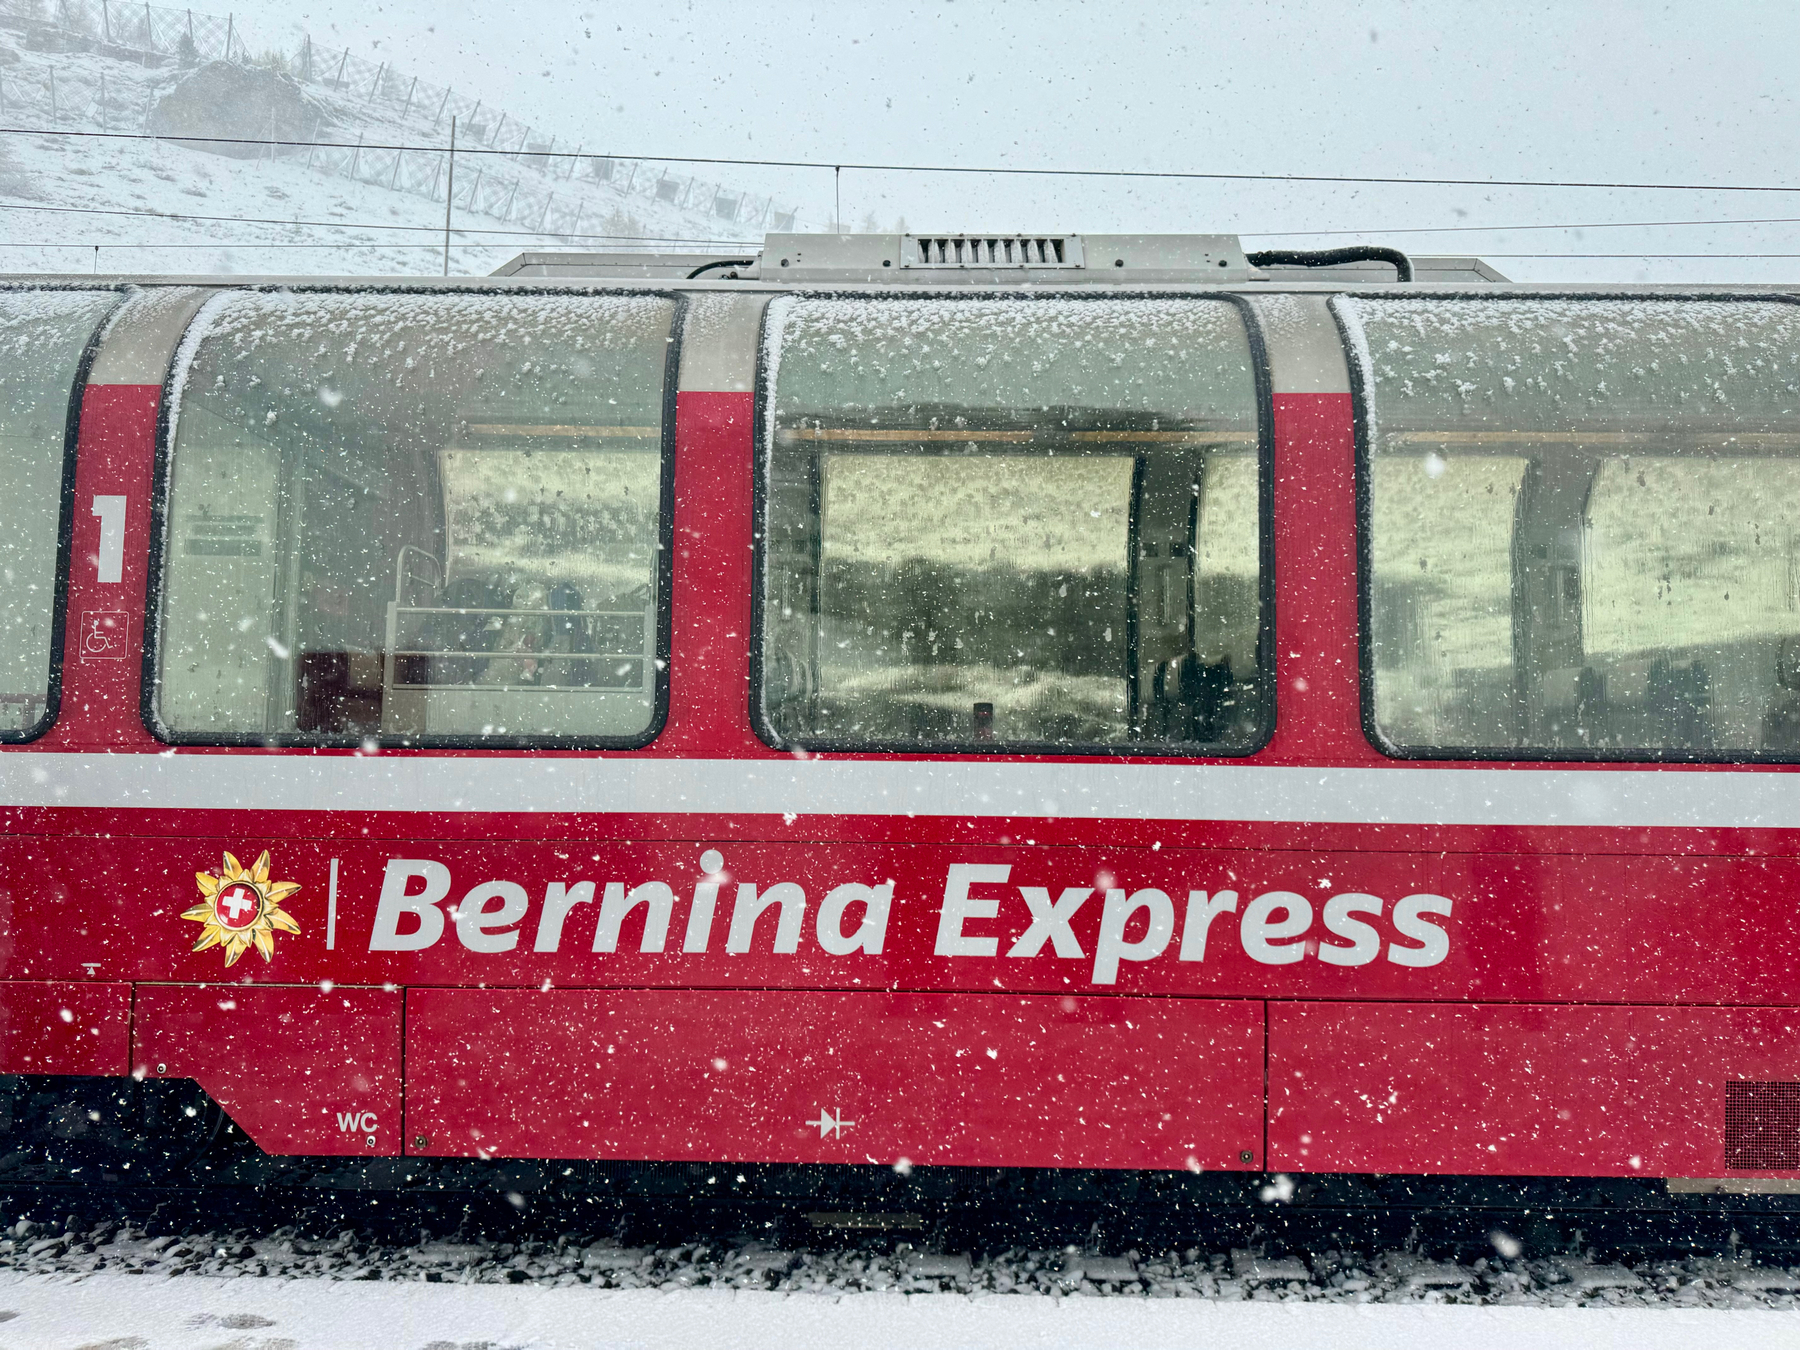 A red, snow-covered train car with large windows, labeled “Bernina Express,” is stopped in a snowy landscape. Snowflakes are visible in the air, and the setting appears to be a cold, wintry environment.